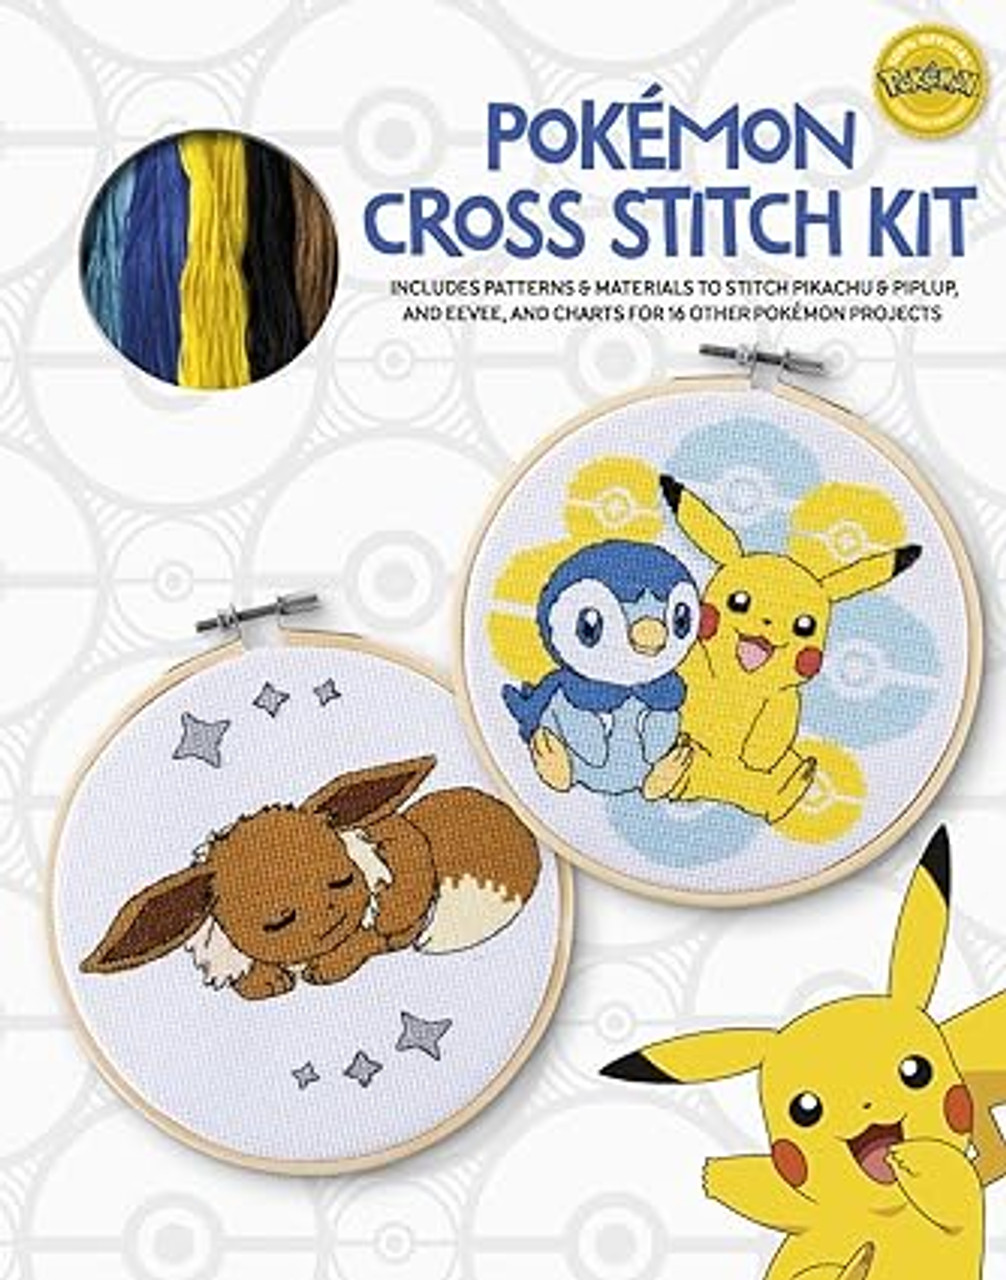 Pokémon Cross Stitch Kit: Includes patterns and materials to stitch Pikachu  & Piplup, & Evee, and charts for 16 other Pokémon projects - Book Mark